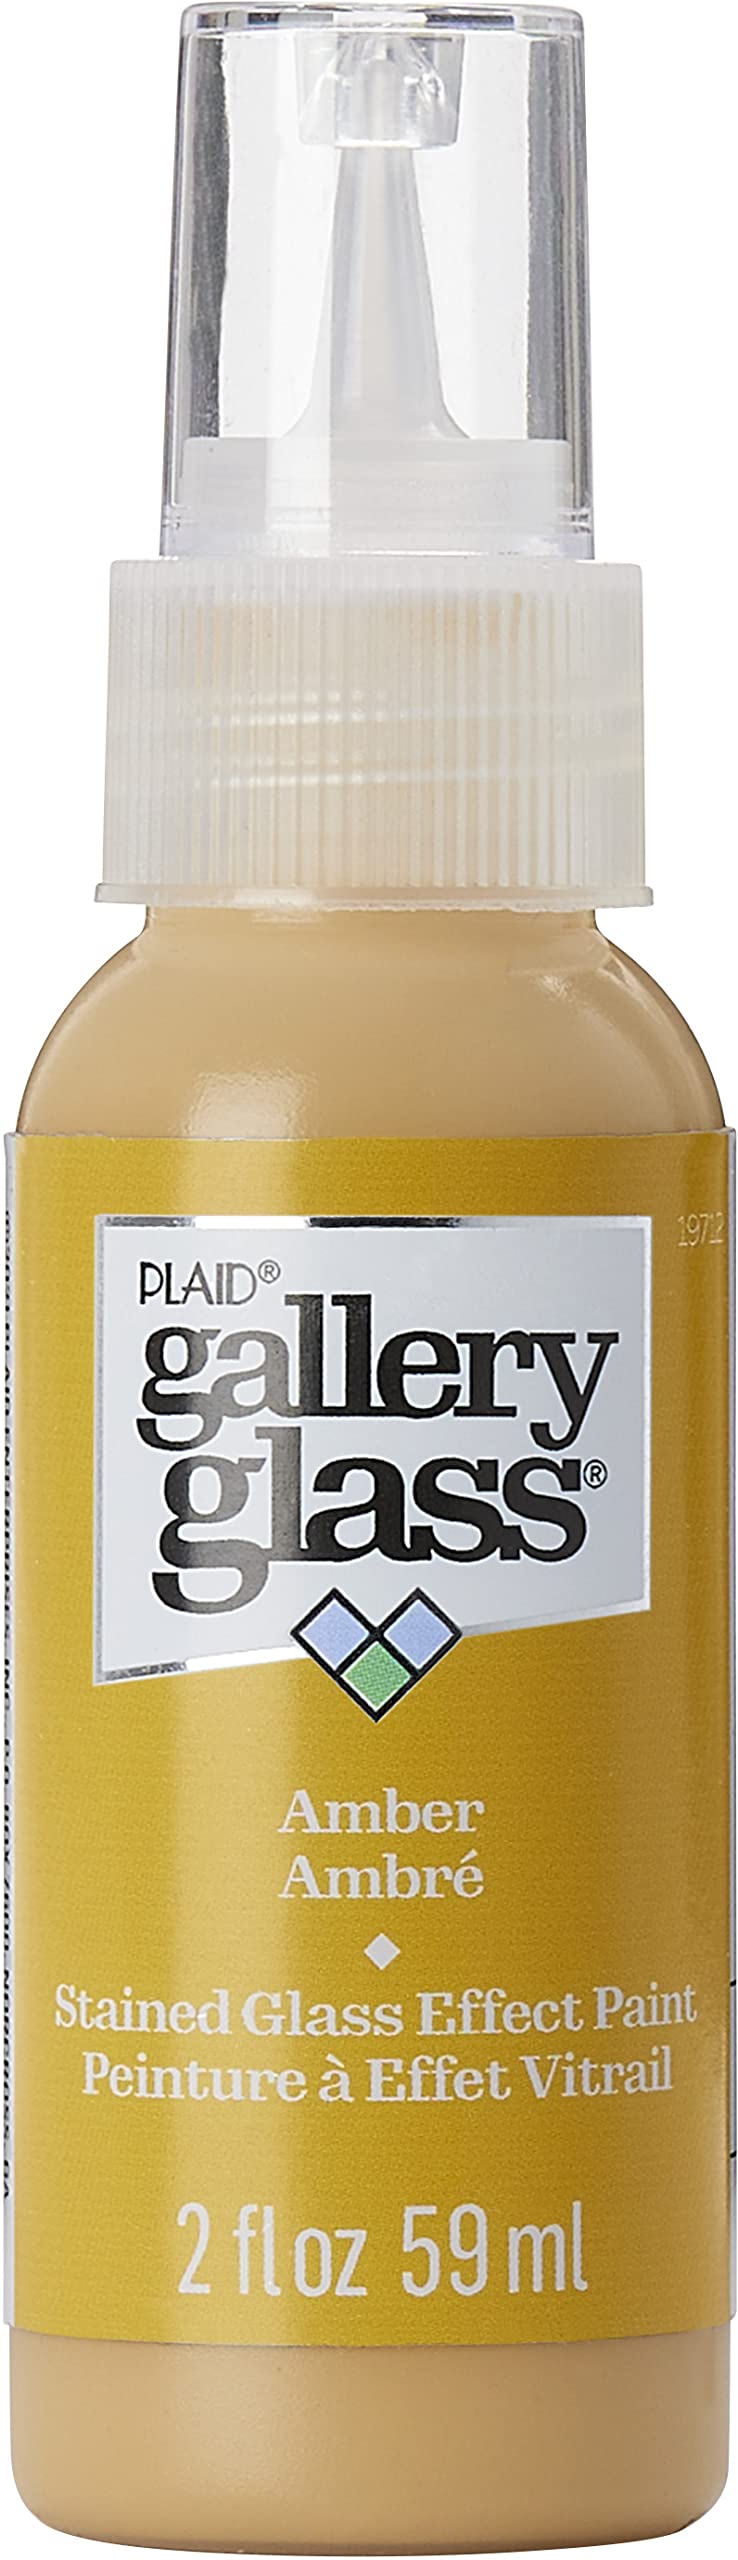 Gallery Glass, Bright White Stained Glass 2 fl oz Brilliant Smooth Finish  Paint, Perfect for Easy to Apply DIY Arts and Crafts, 19692